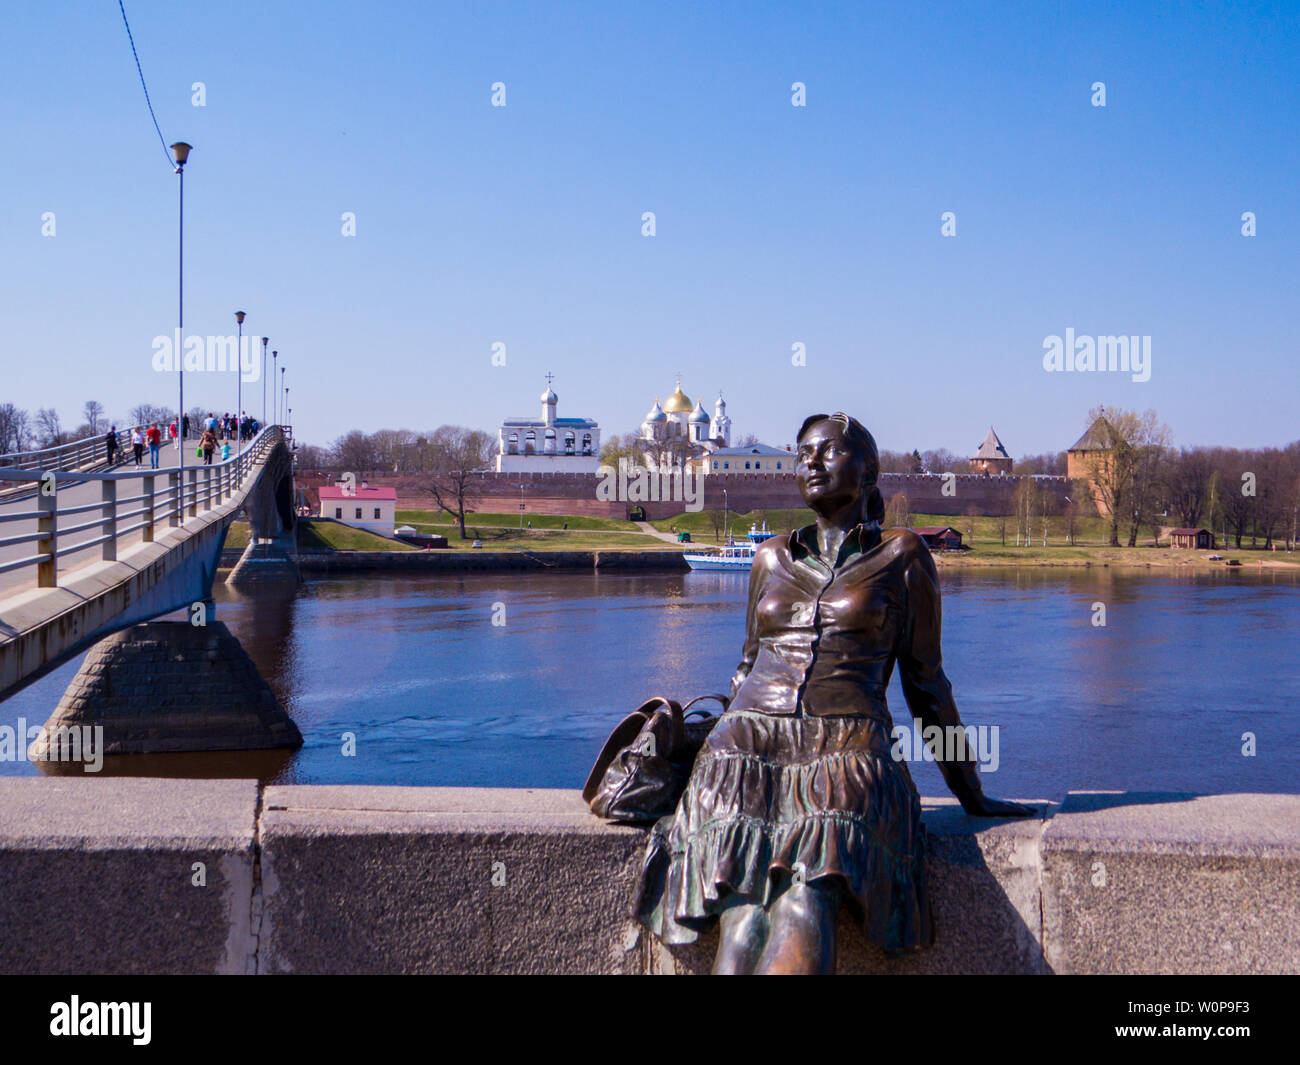 VELIKY NOVGOROD, RUSSIA - APRIL 24, 2019: View of the Girl-Tourist monument on the embankment of the Volkhov River. Stock Photo